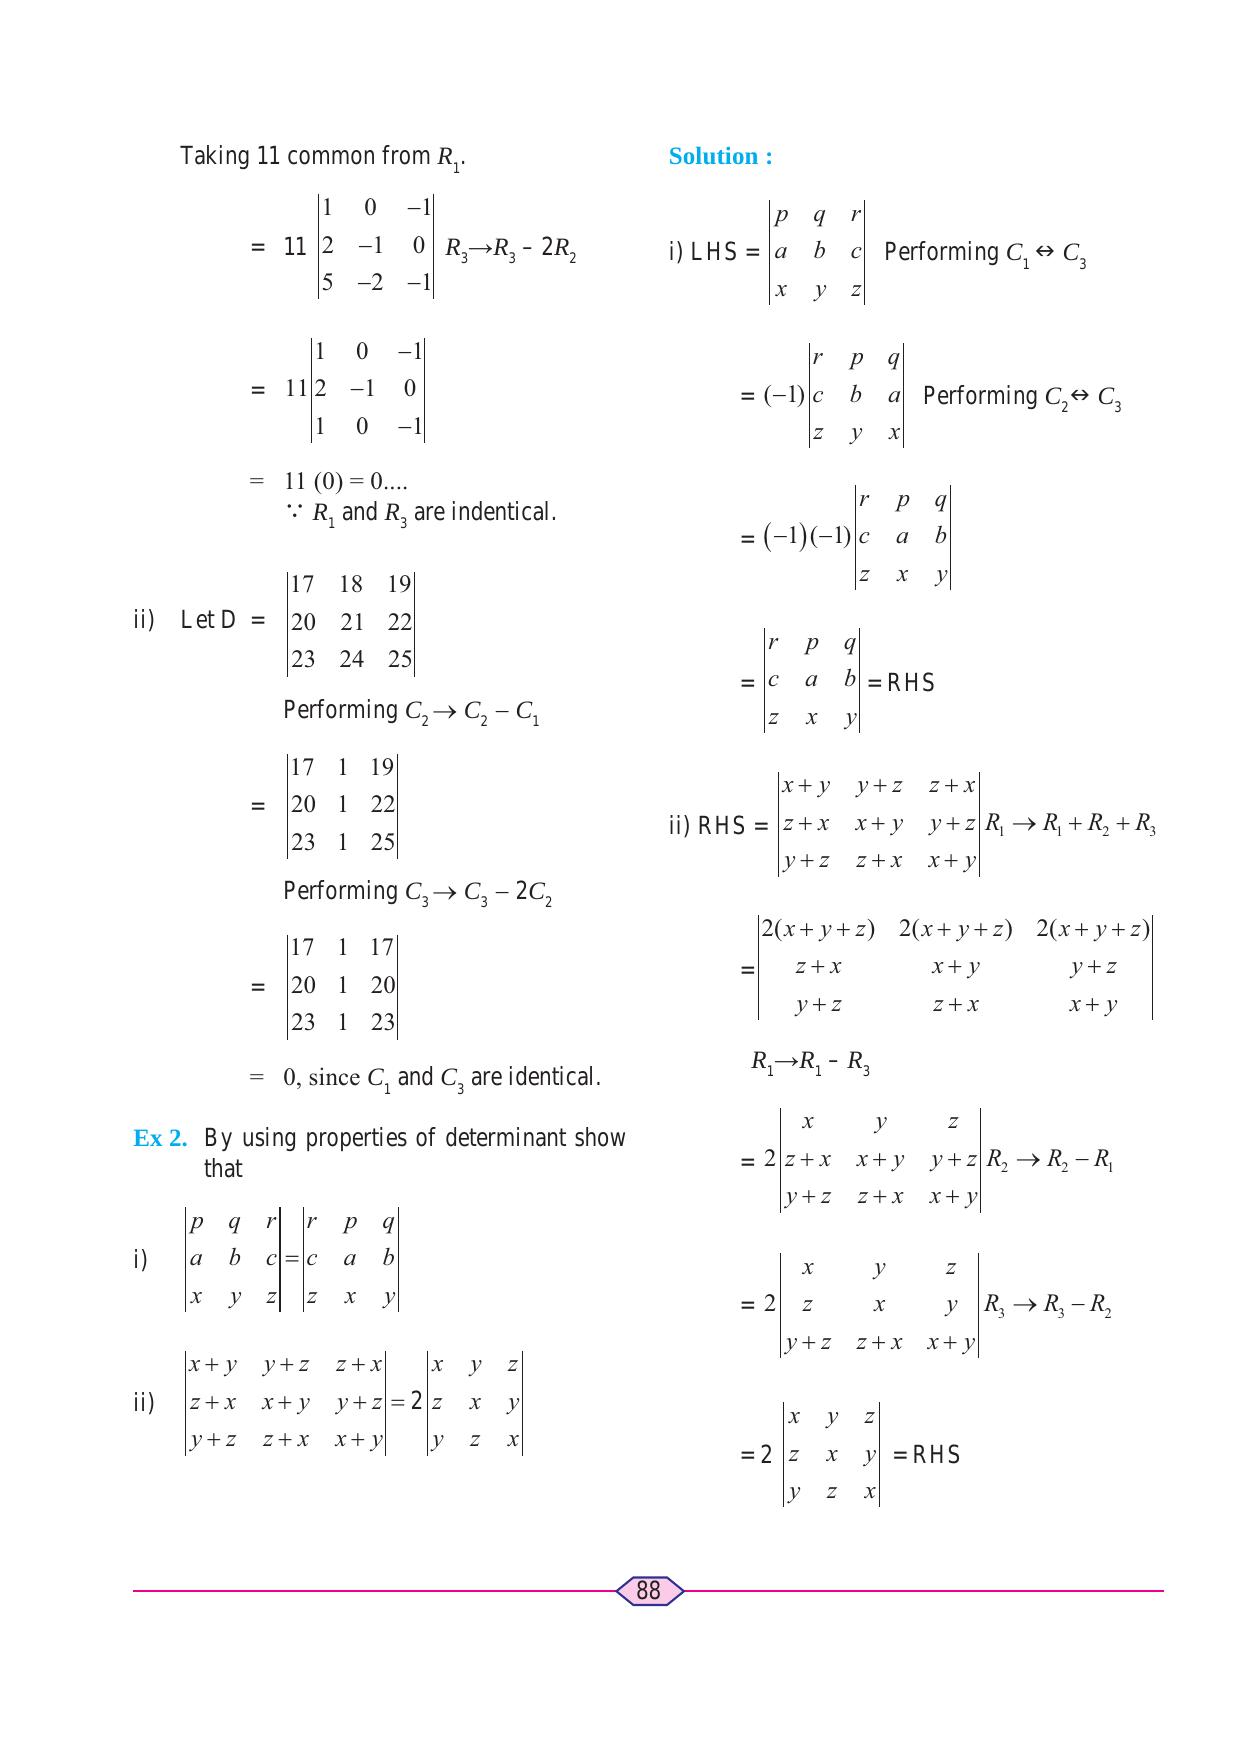 Maharashtra Board Class 11 Maths (Commerce) (Part 1) Textbook - Page 98